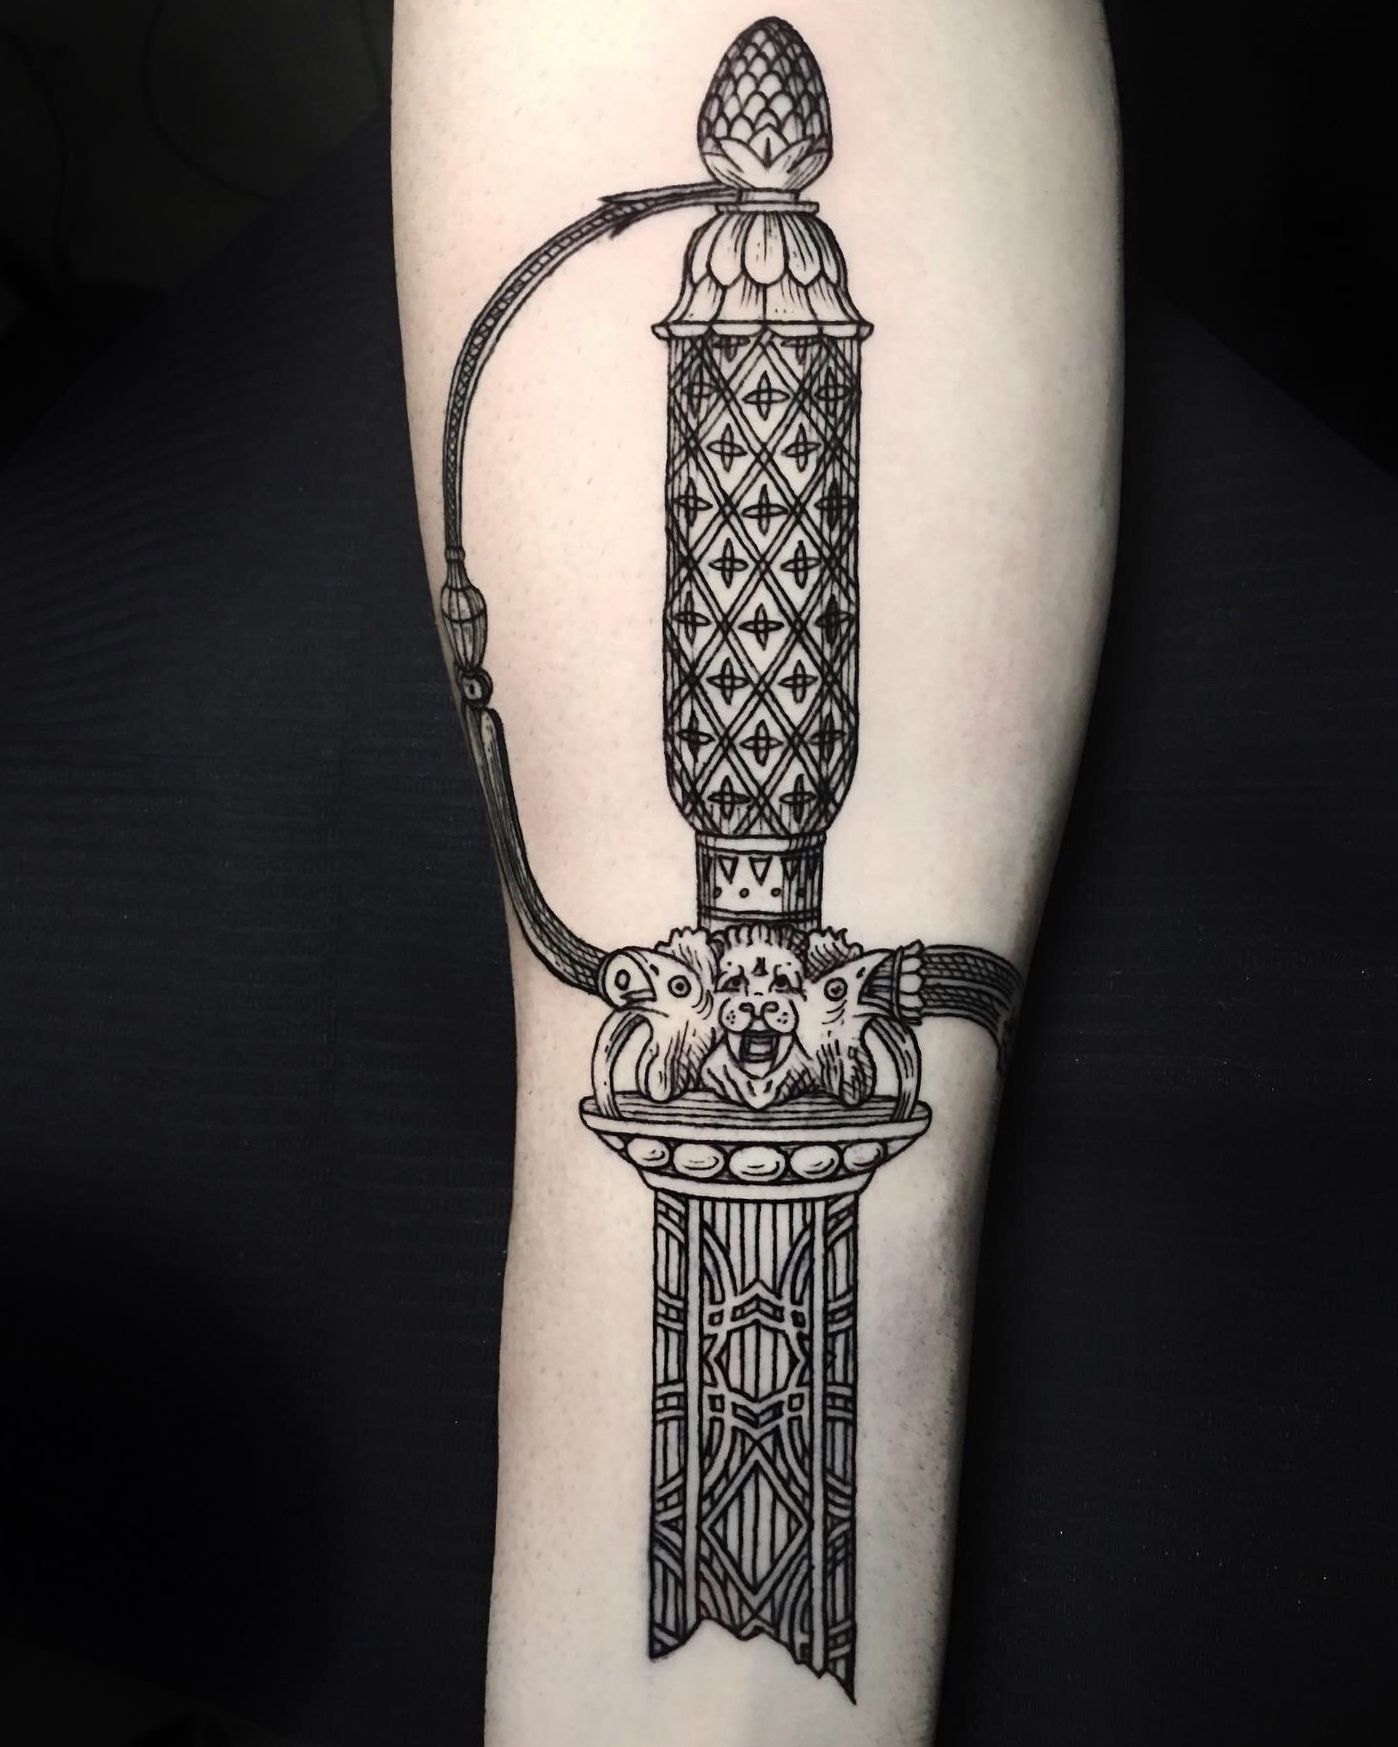 sword tattoo on the forearm of girl